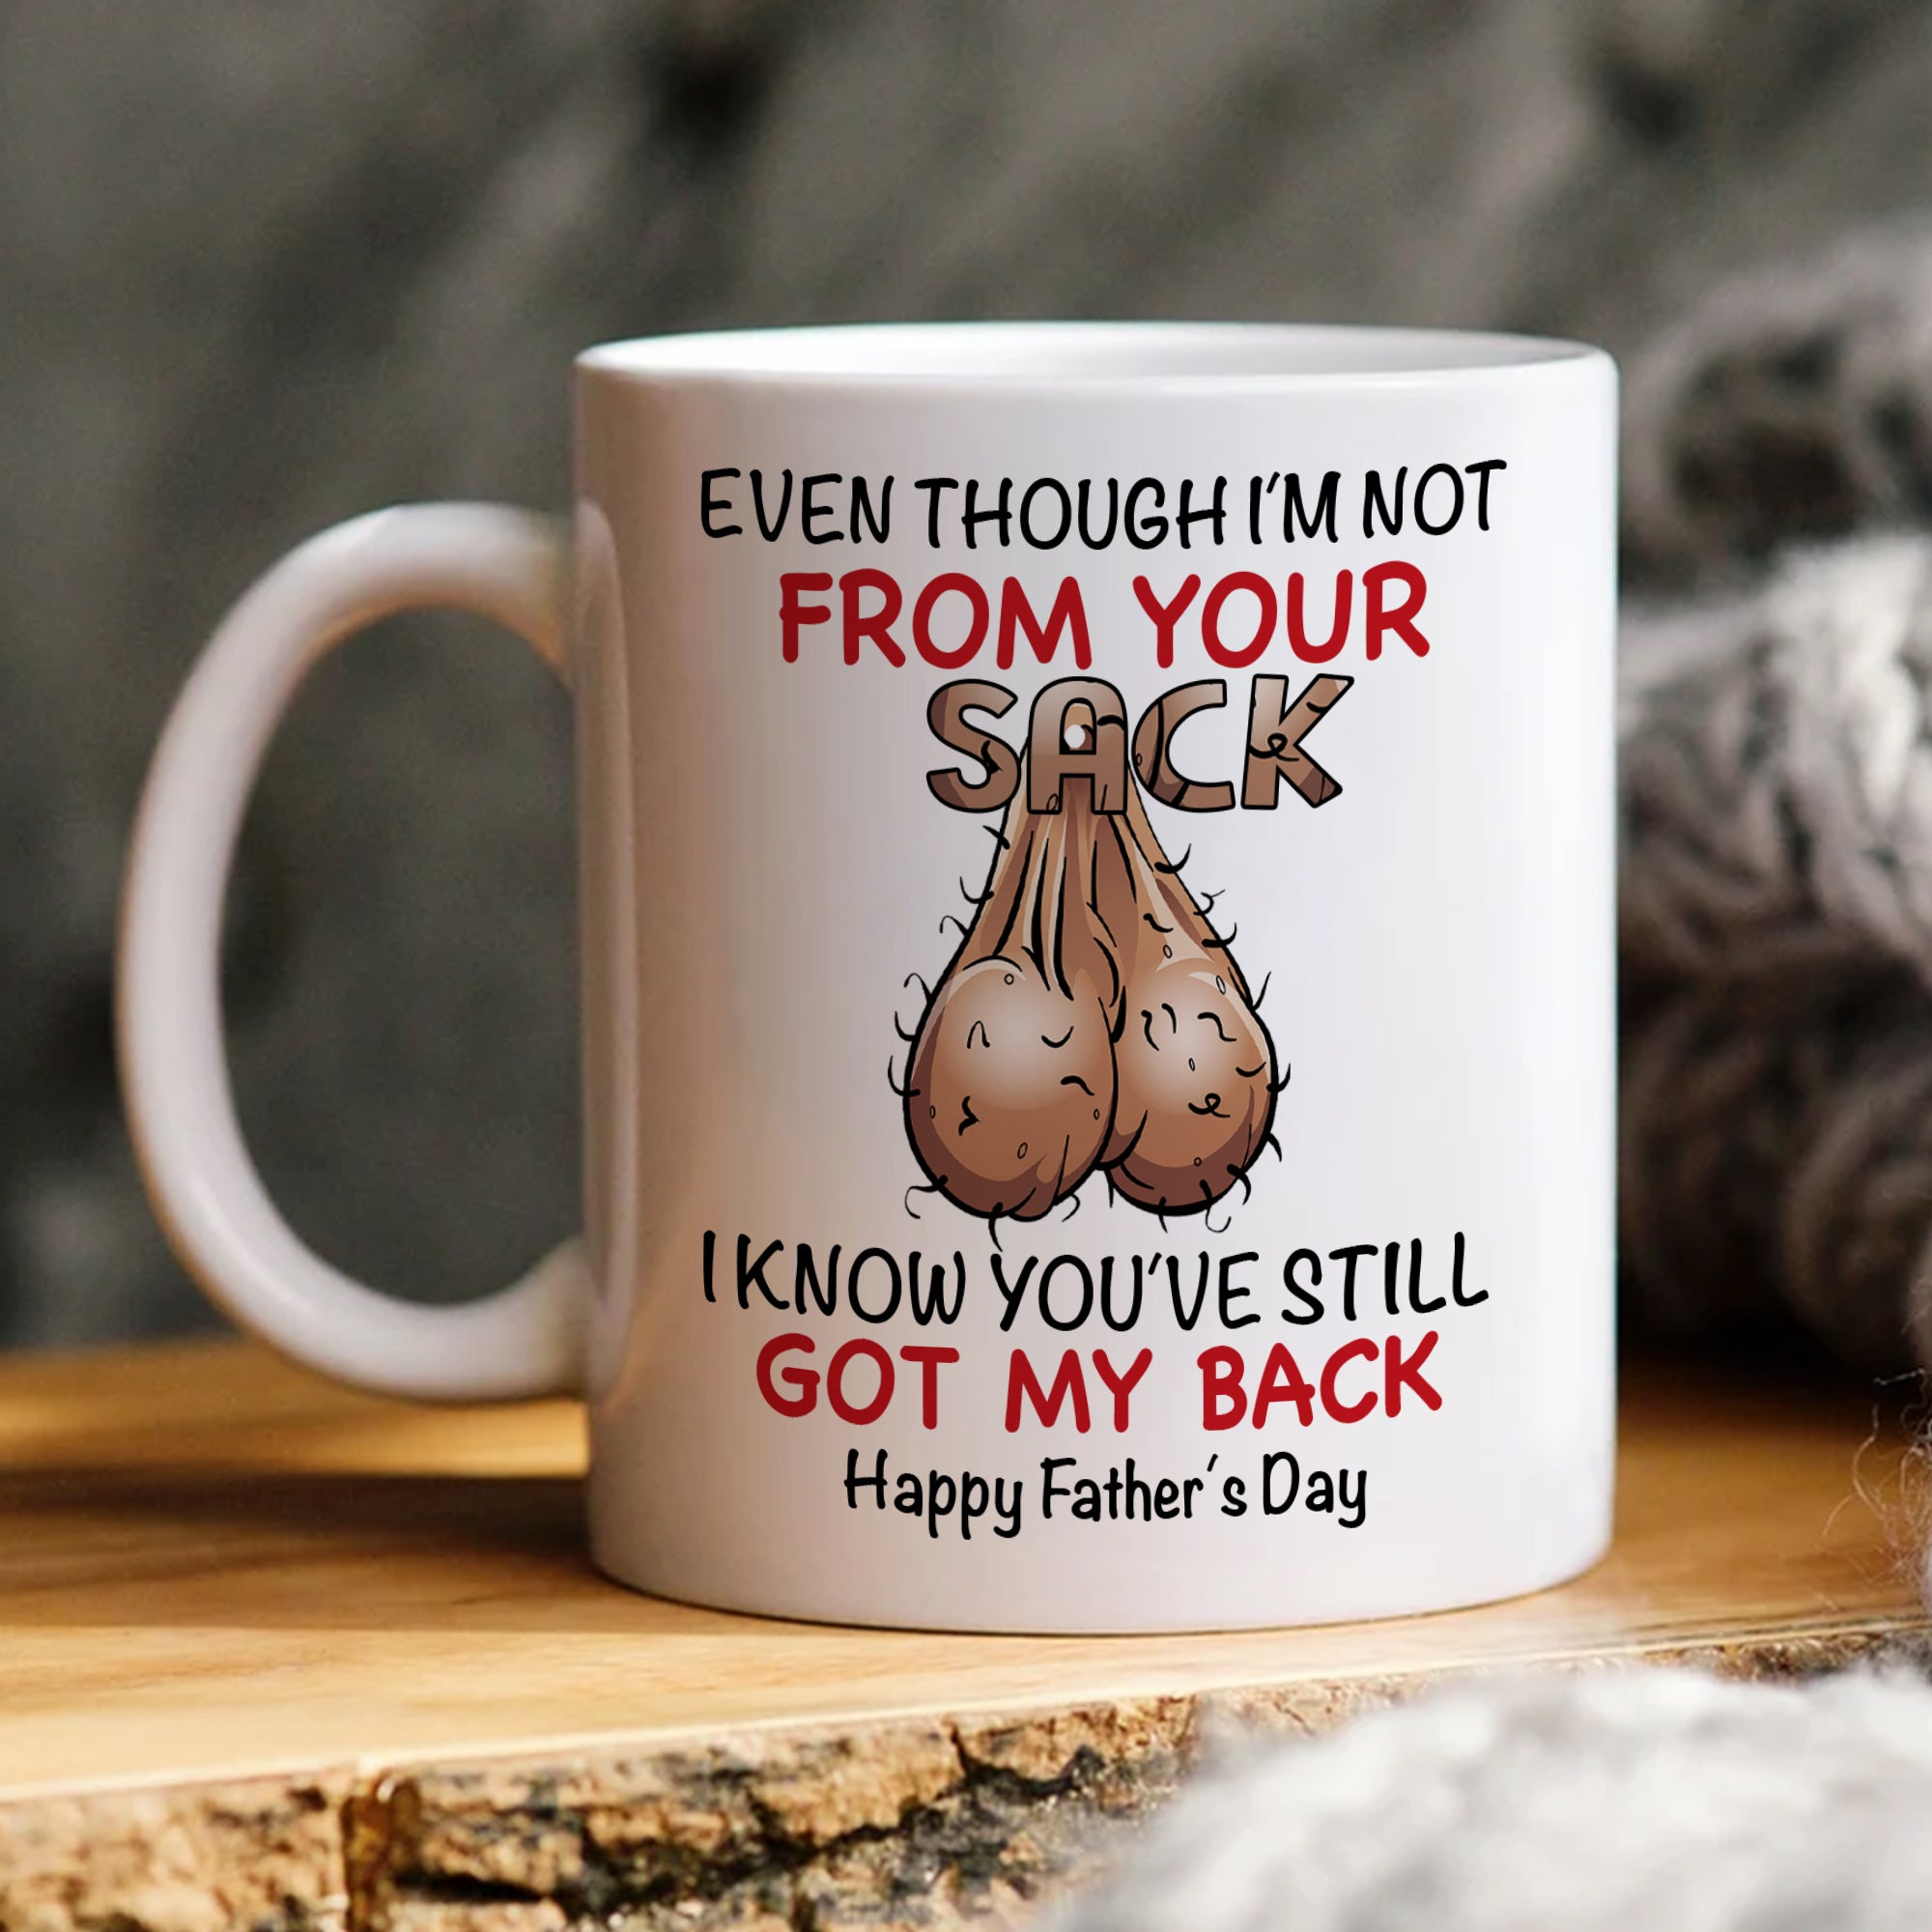 mug for happy father's day 